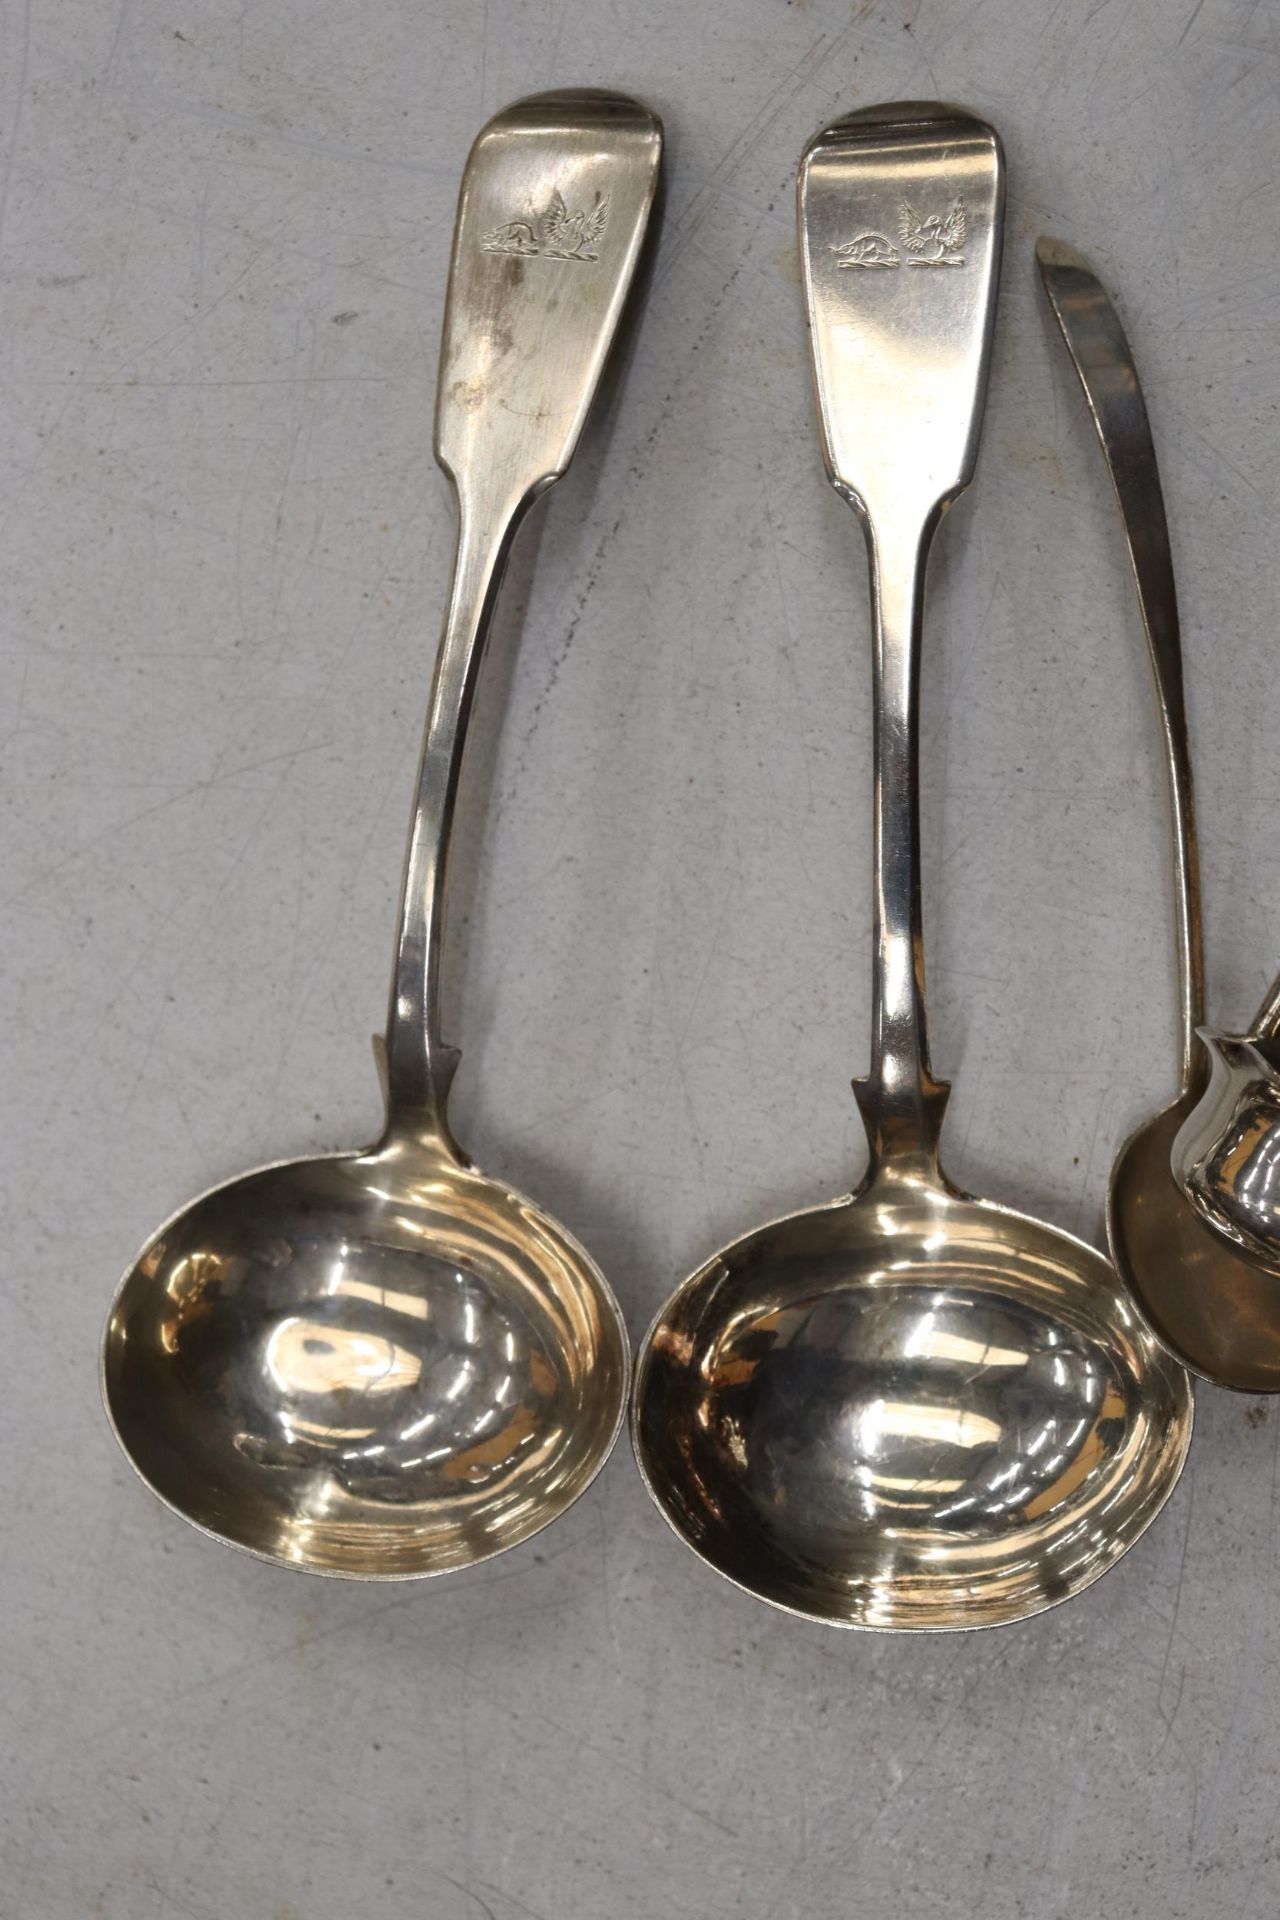 SIX HALLMARKED SILVER ITEMS TO INCLUDE LADELS, NIPS AND SPOONS GROSS WEIGHT 184 GRAMS - Image 3 of 9